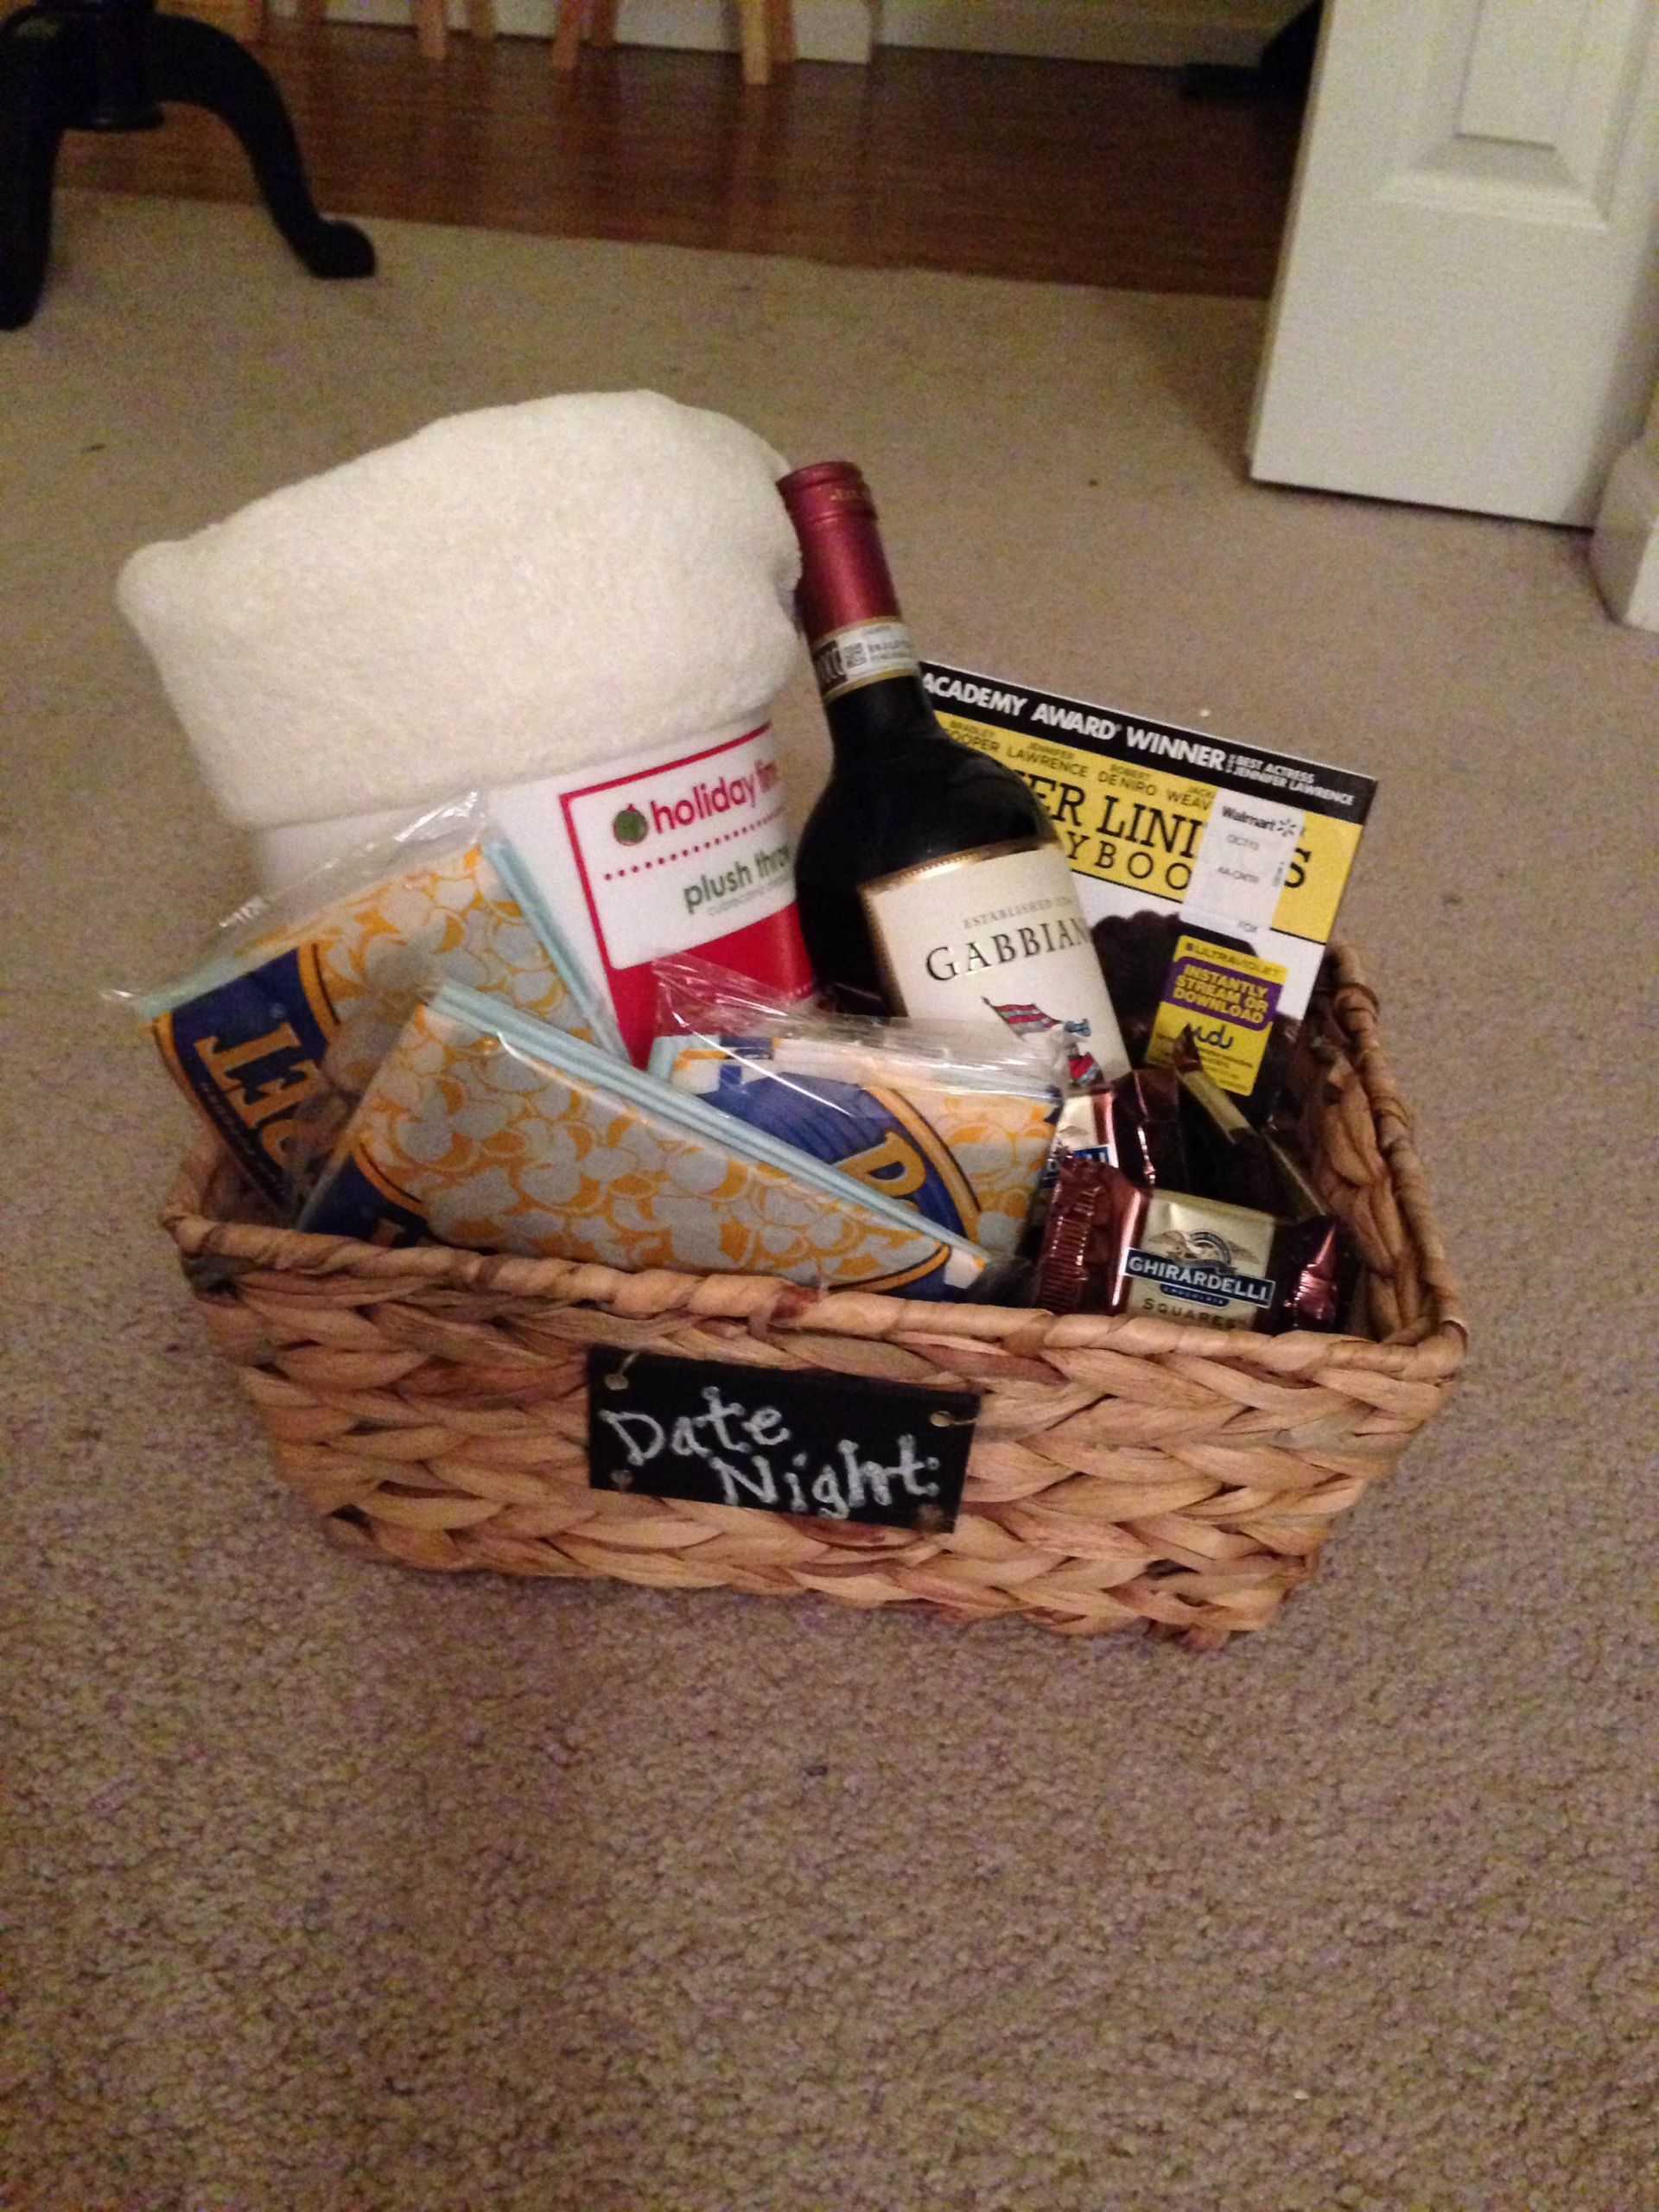 Christmas Grab Bag Ideas
 Holiday Grab Bag Gift Idea "Date Night" Includes a basket